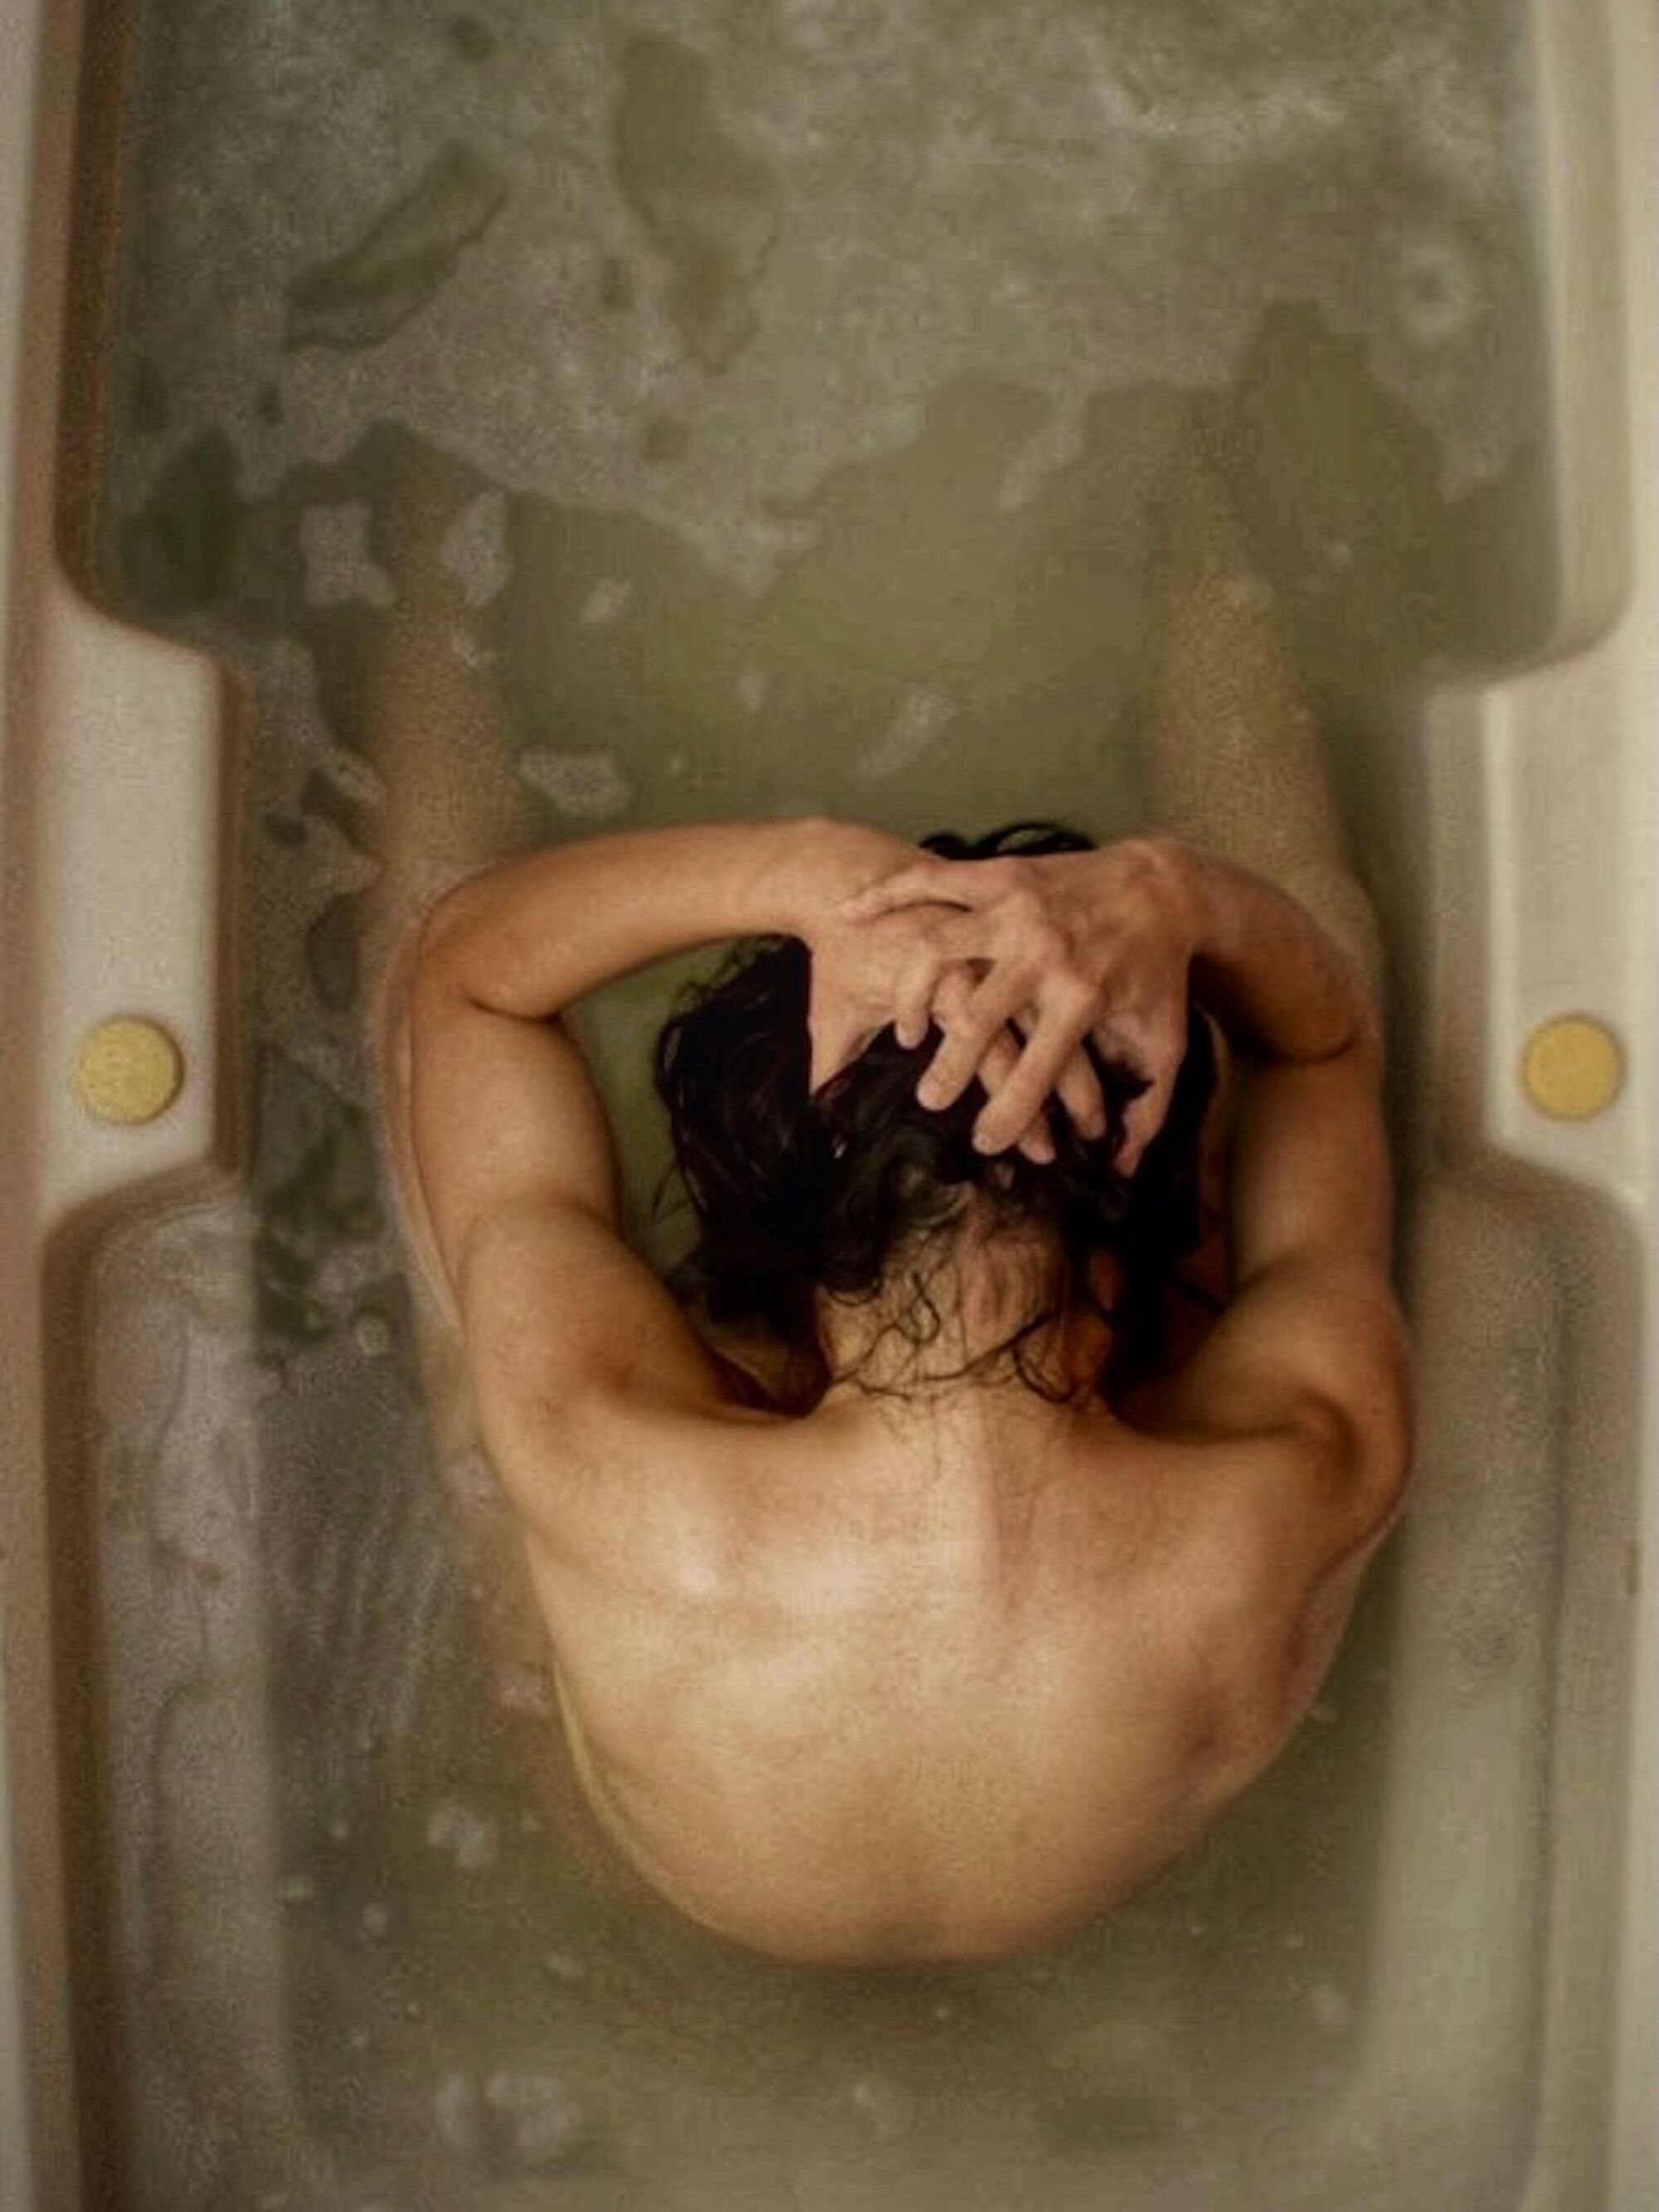 A person seen from above, sitting naked in a bathtub, hands on head.